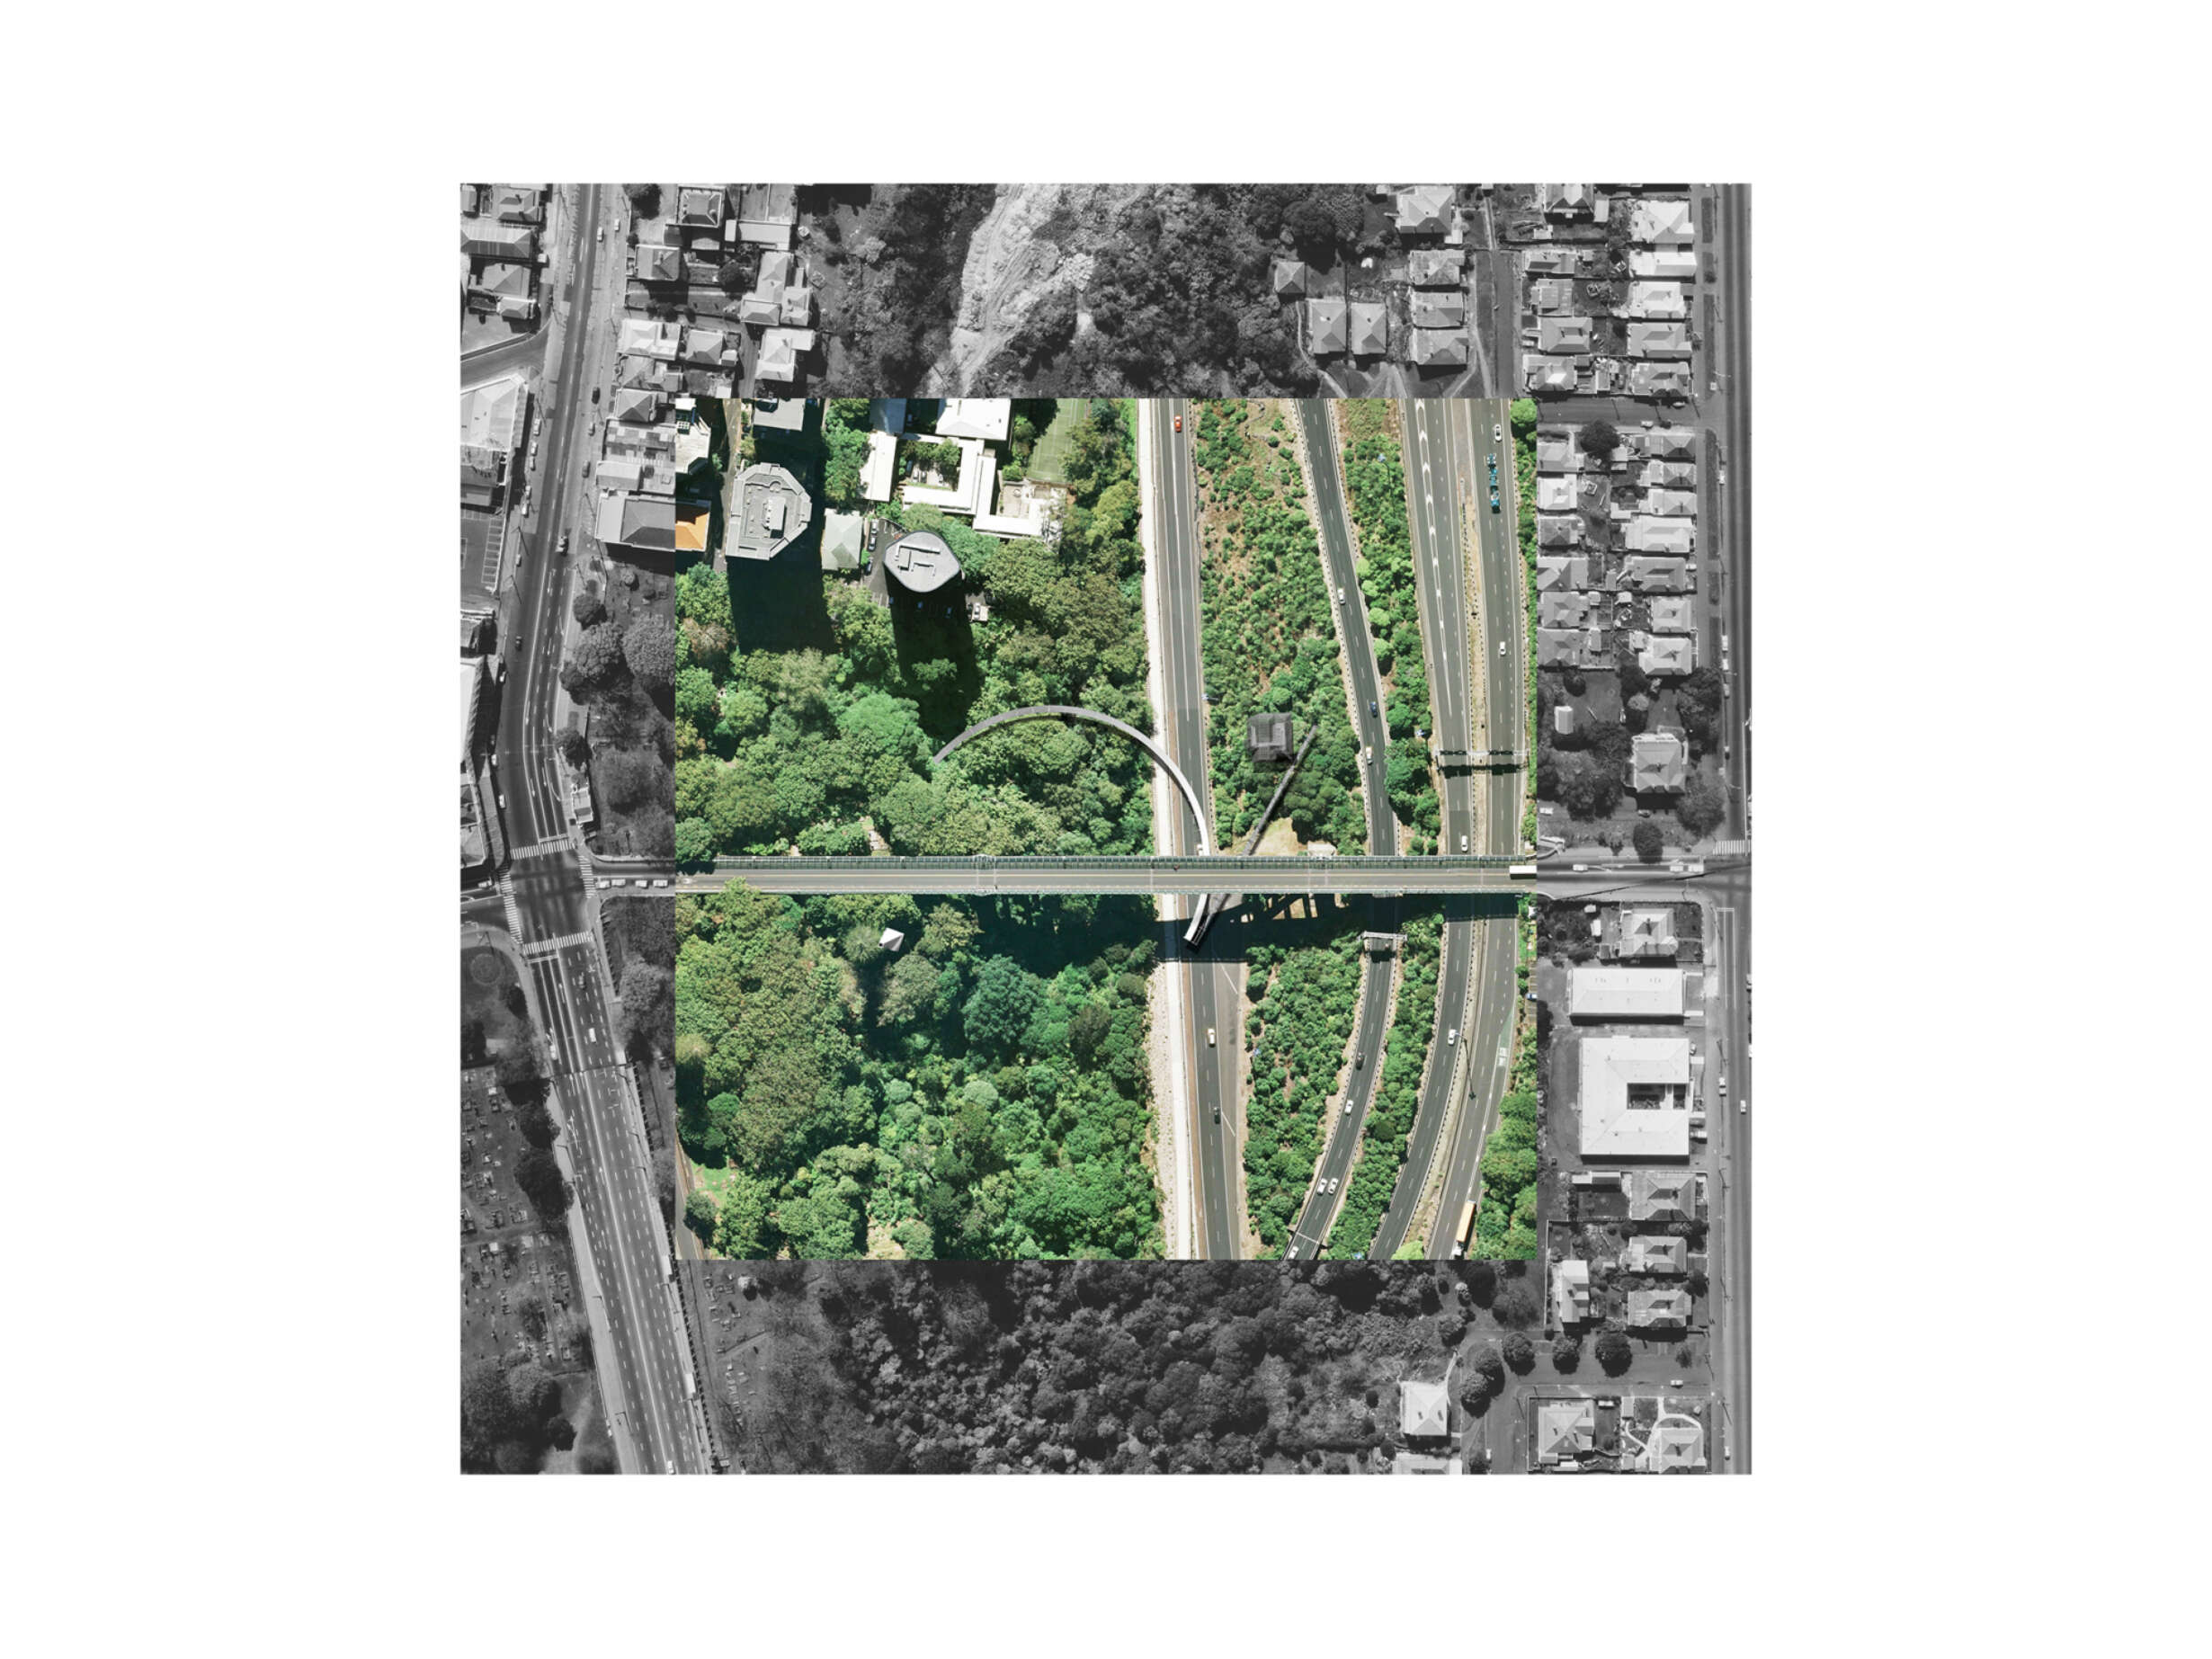 Site plan (enlarged detail) showing the proposed architecture spanning between pre- and post-motorway conditions. Source images from 1963 and 2017.